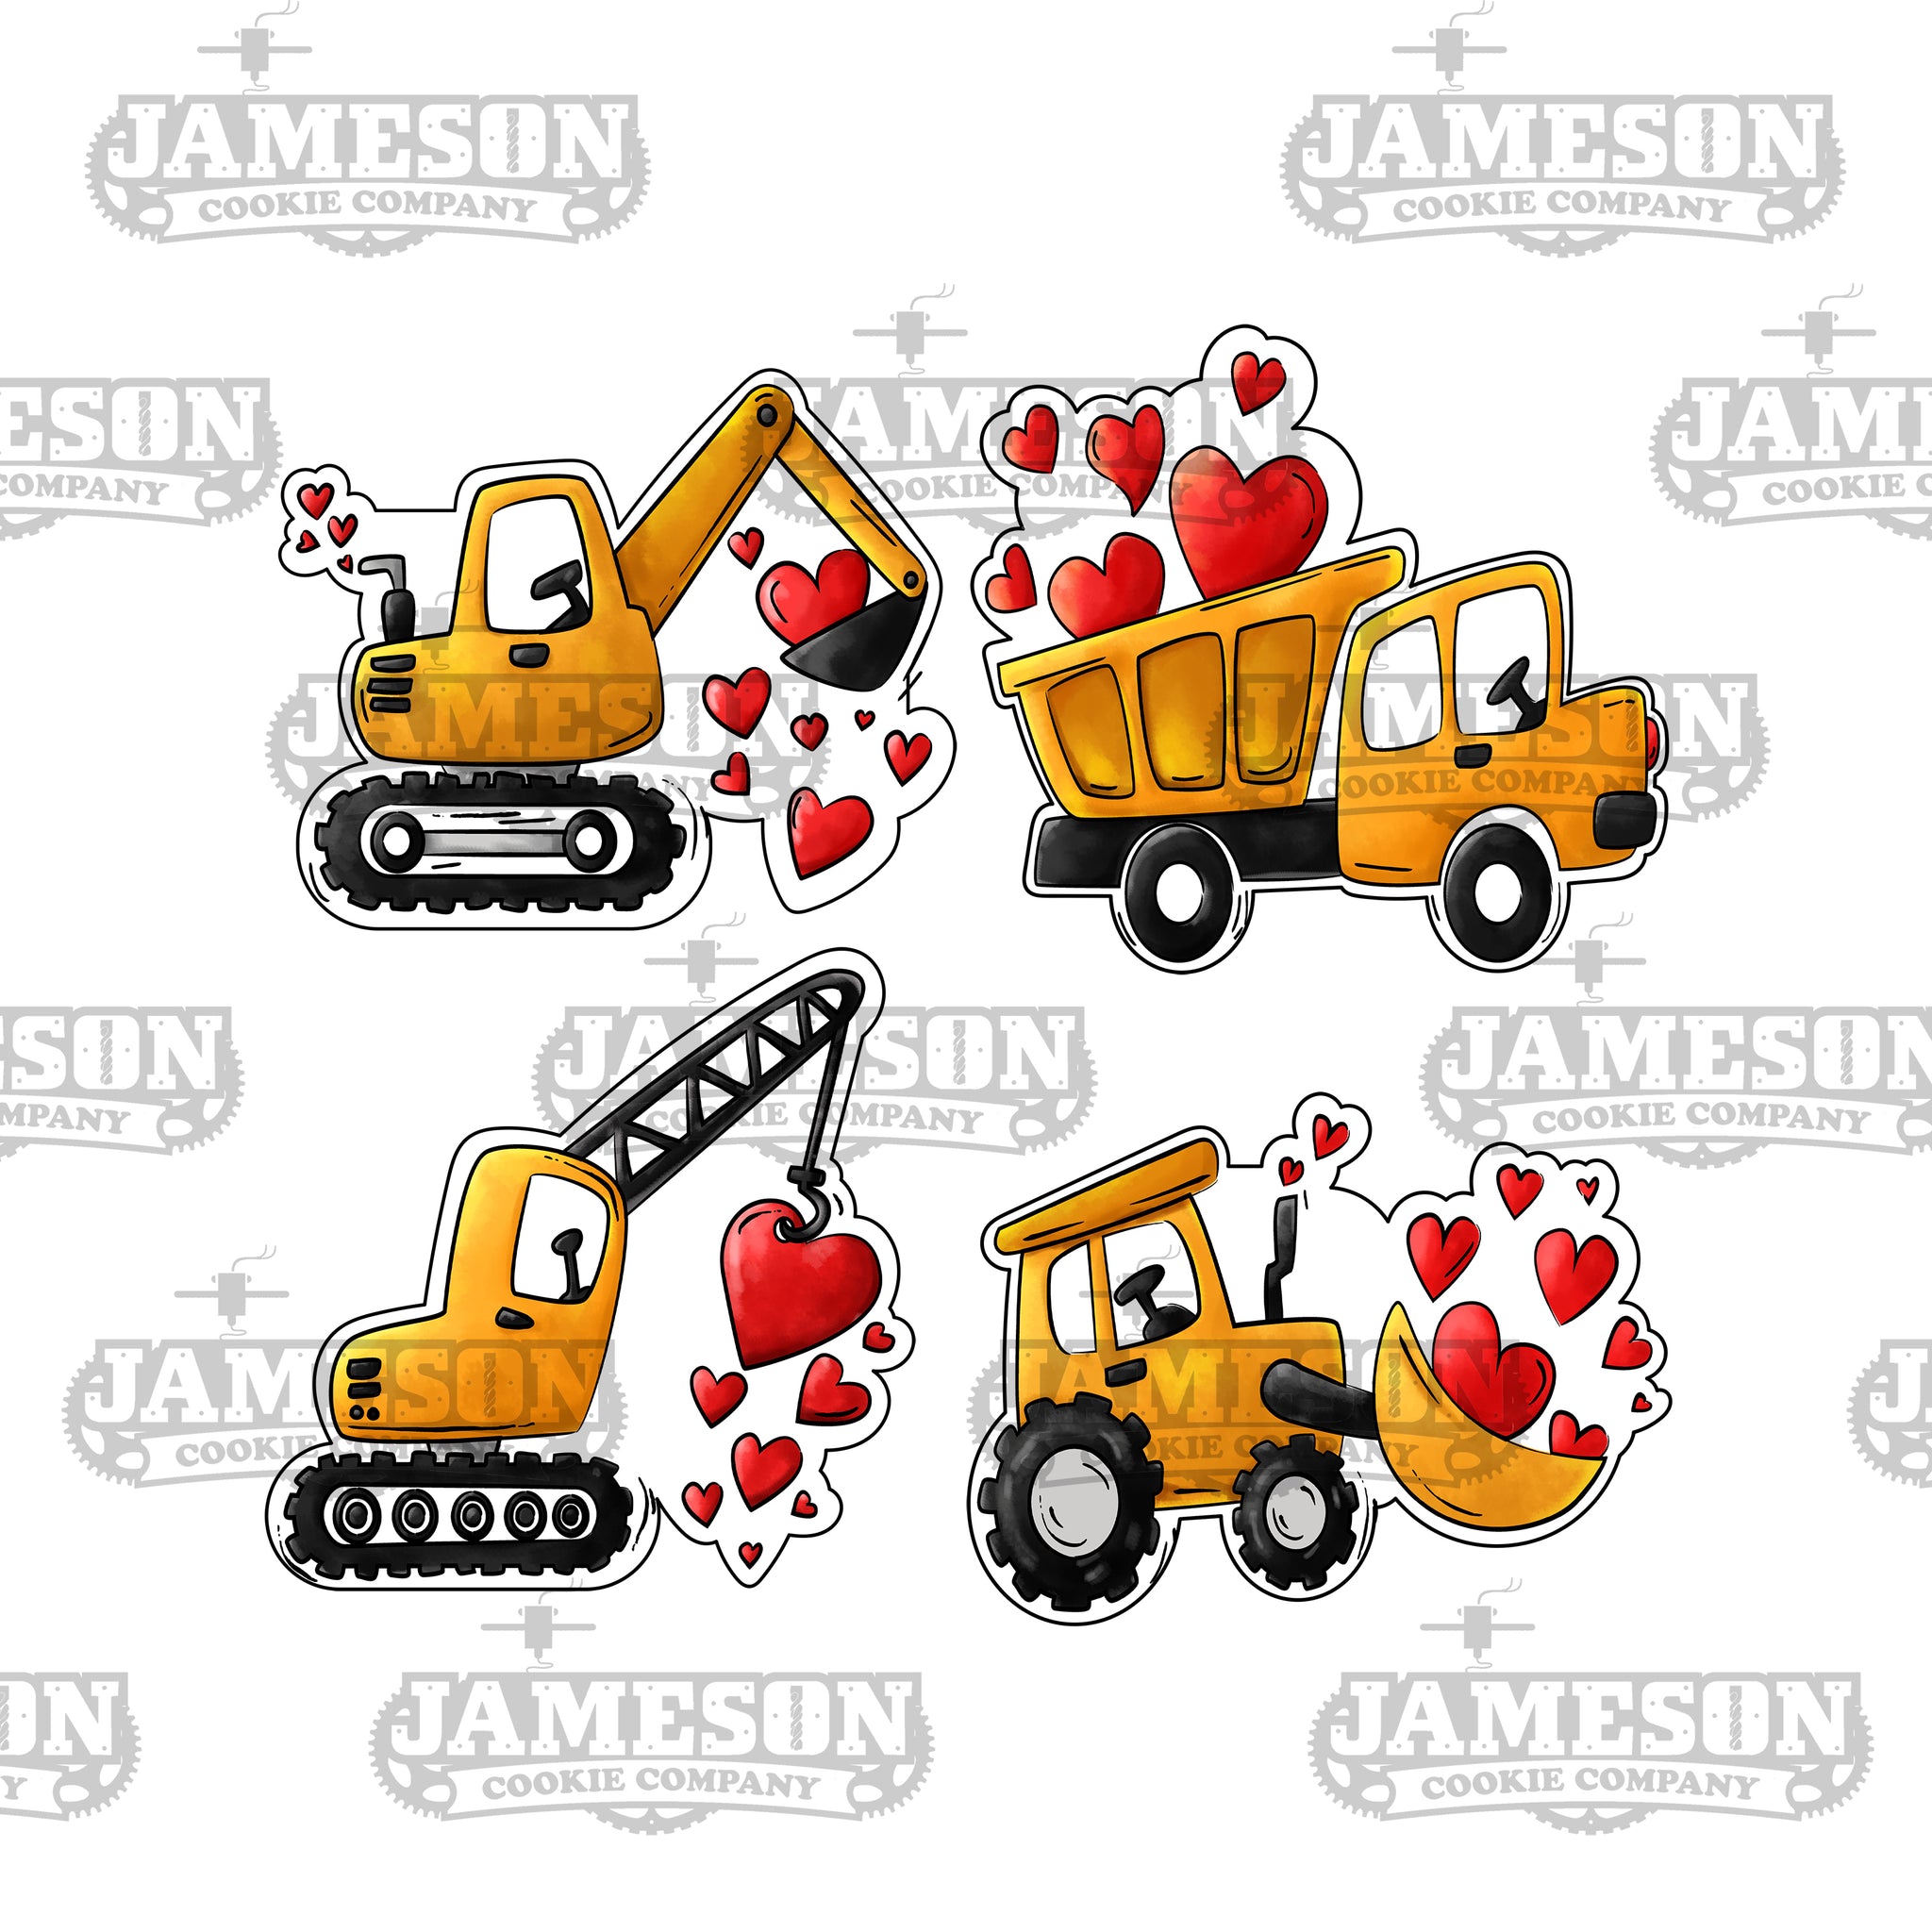 Valentine's Day Love Construction Cookie Cutter Set - Excavator, Dump Truck, Crane, and Bulldozer with Hearts